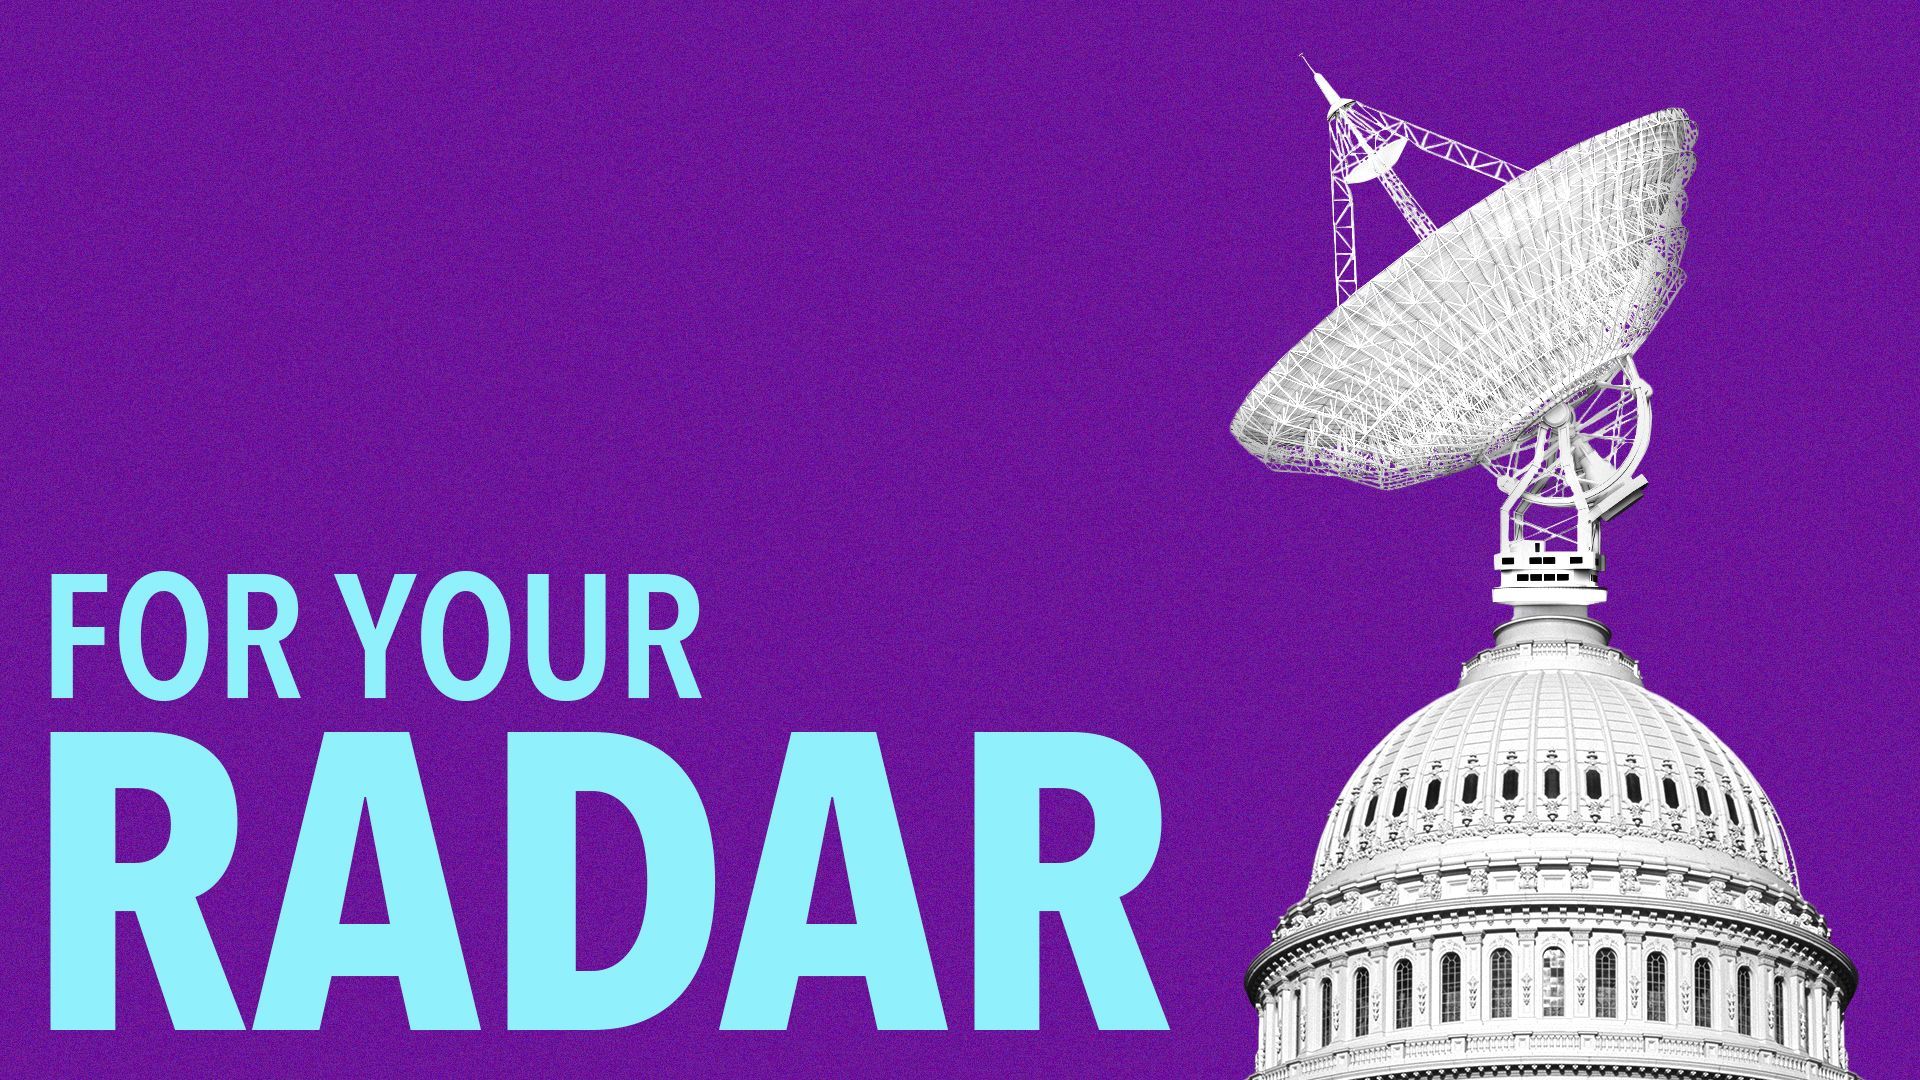 illustration of the US Capitol building with a large satellite system sticking out of the top next to text that reads "for your radar"